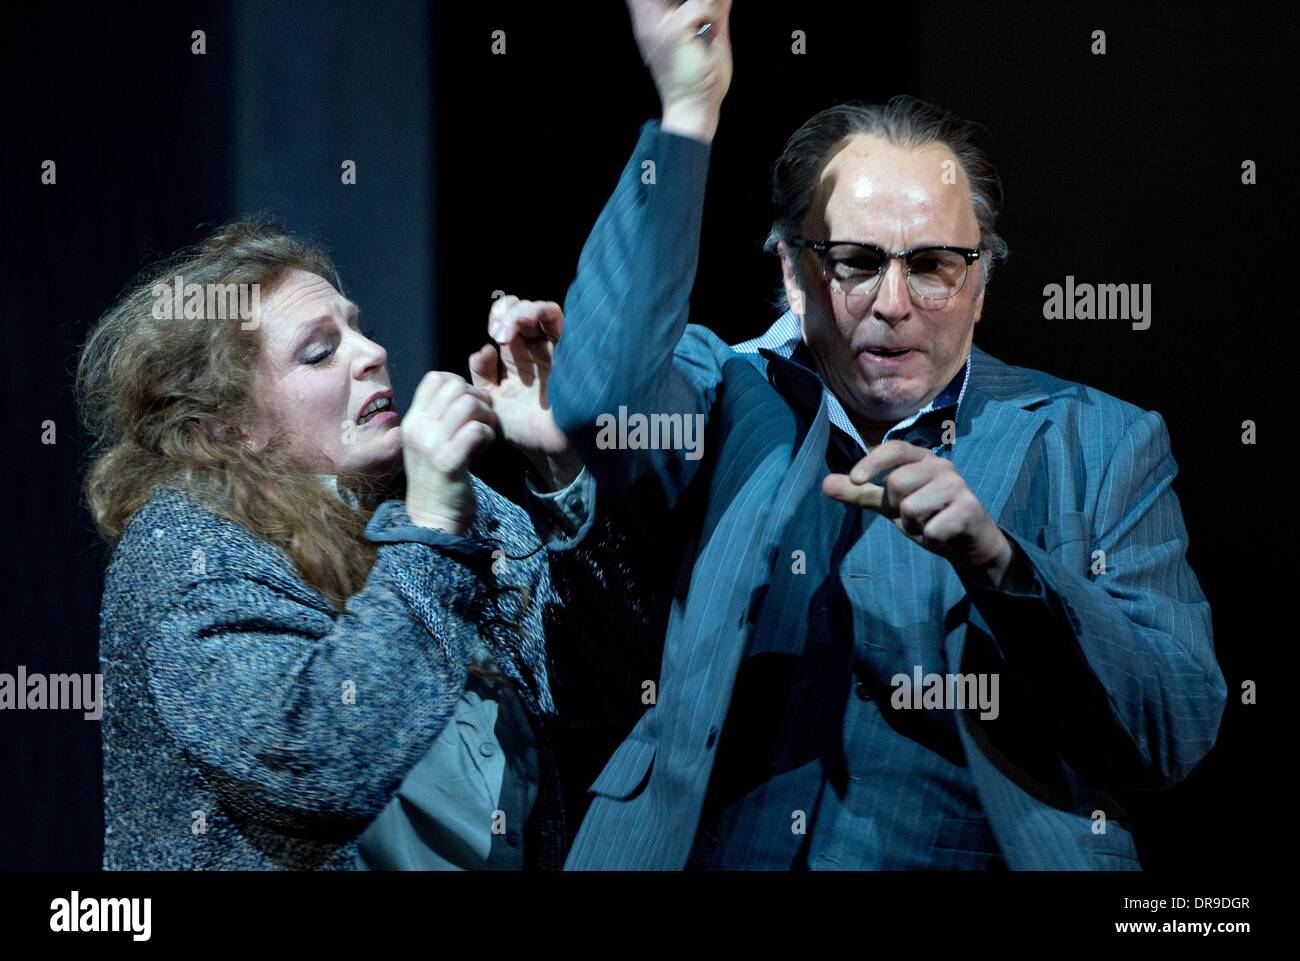 Berlin, Germany. 20th Jan, 2014. Dutch soprano Eva-Maria Westbroek (Kat'a, L) and German tenor Stefan Ruegamer (her husband Tichon) perform during the rehearsal for the opera 'Kat'a Kabanova' at the State Opera in the Schillertheater in Berlin, Germany, 20 January 2014. The opera directed by Leos Janacek will premiere on 25 January 2014. Photo: SOEREN STACHE/dpa/Alamy Live News Stock Photo